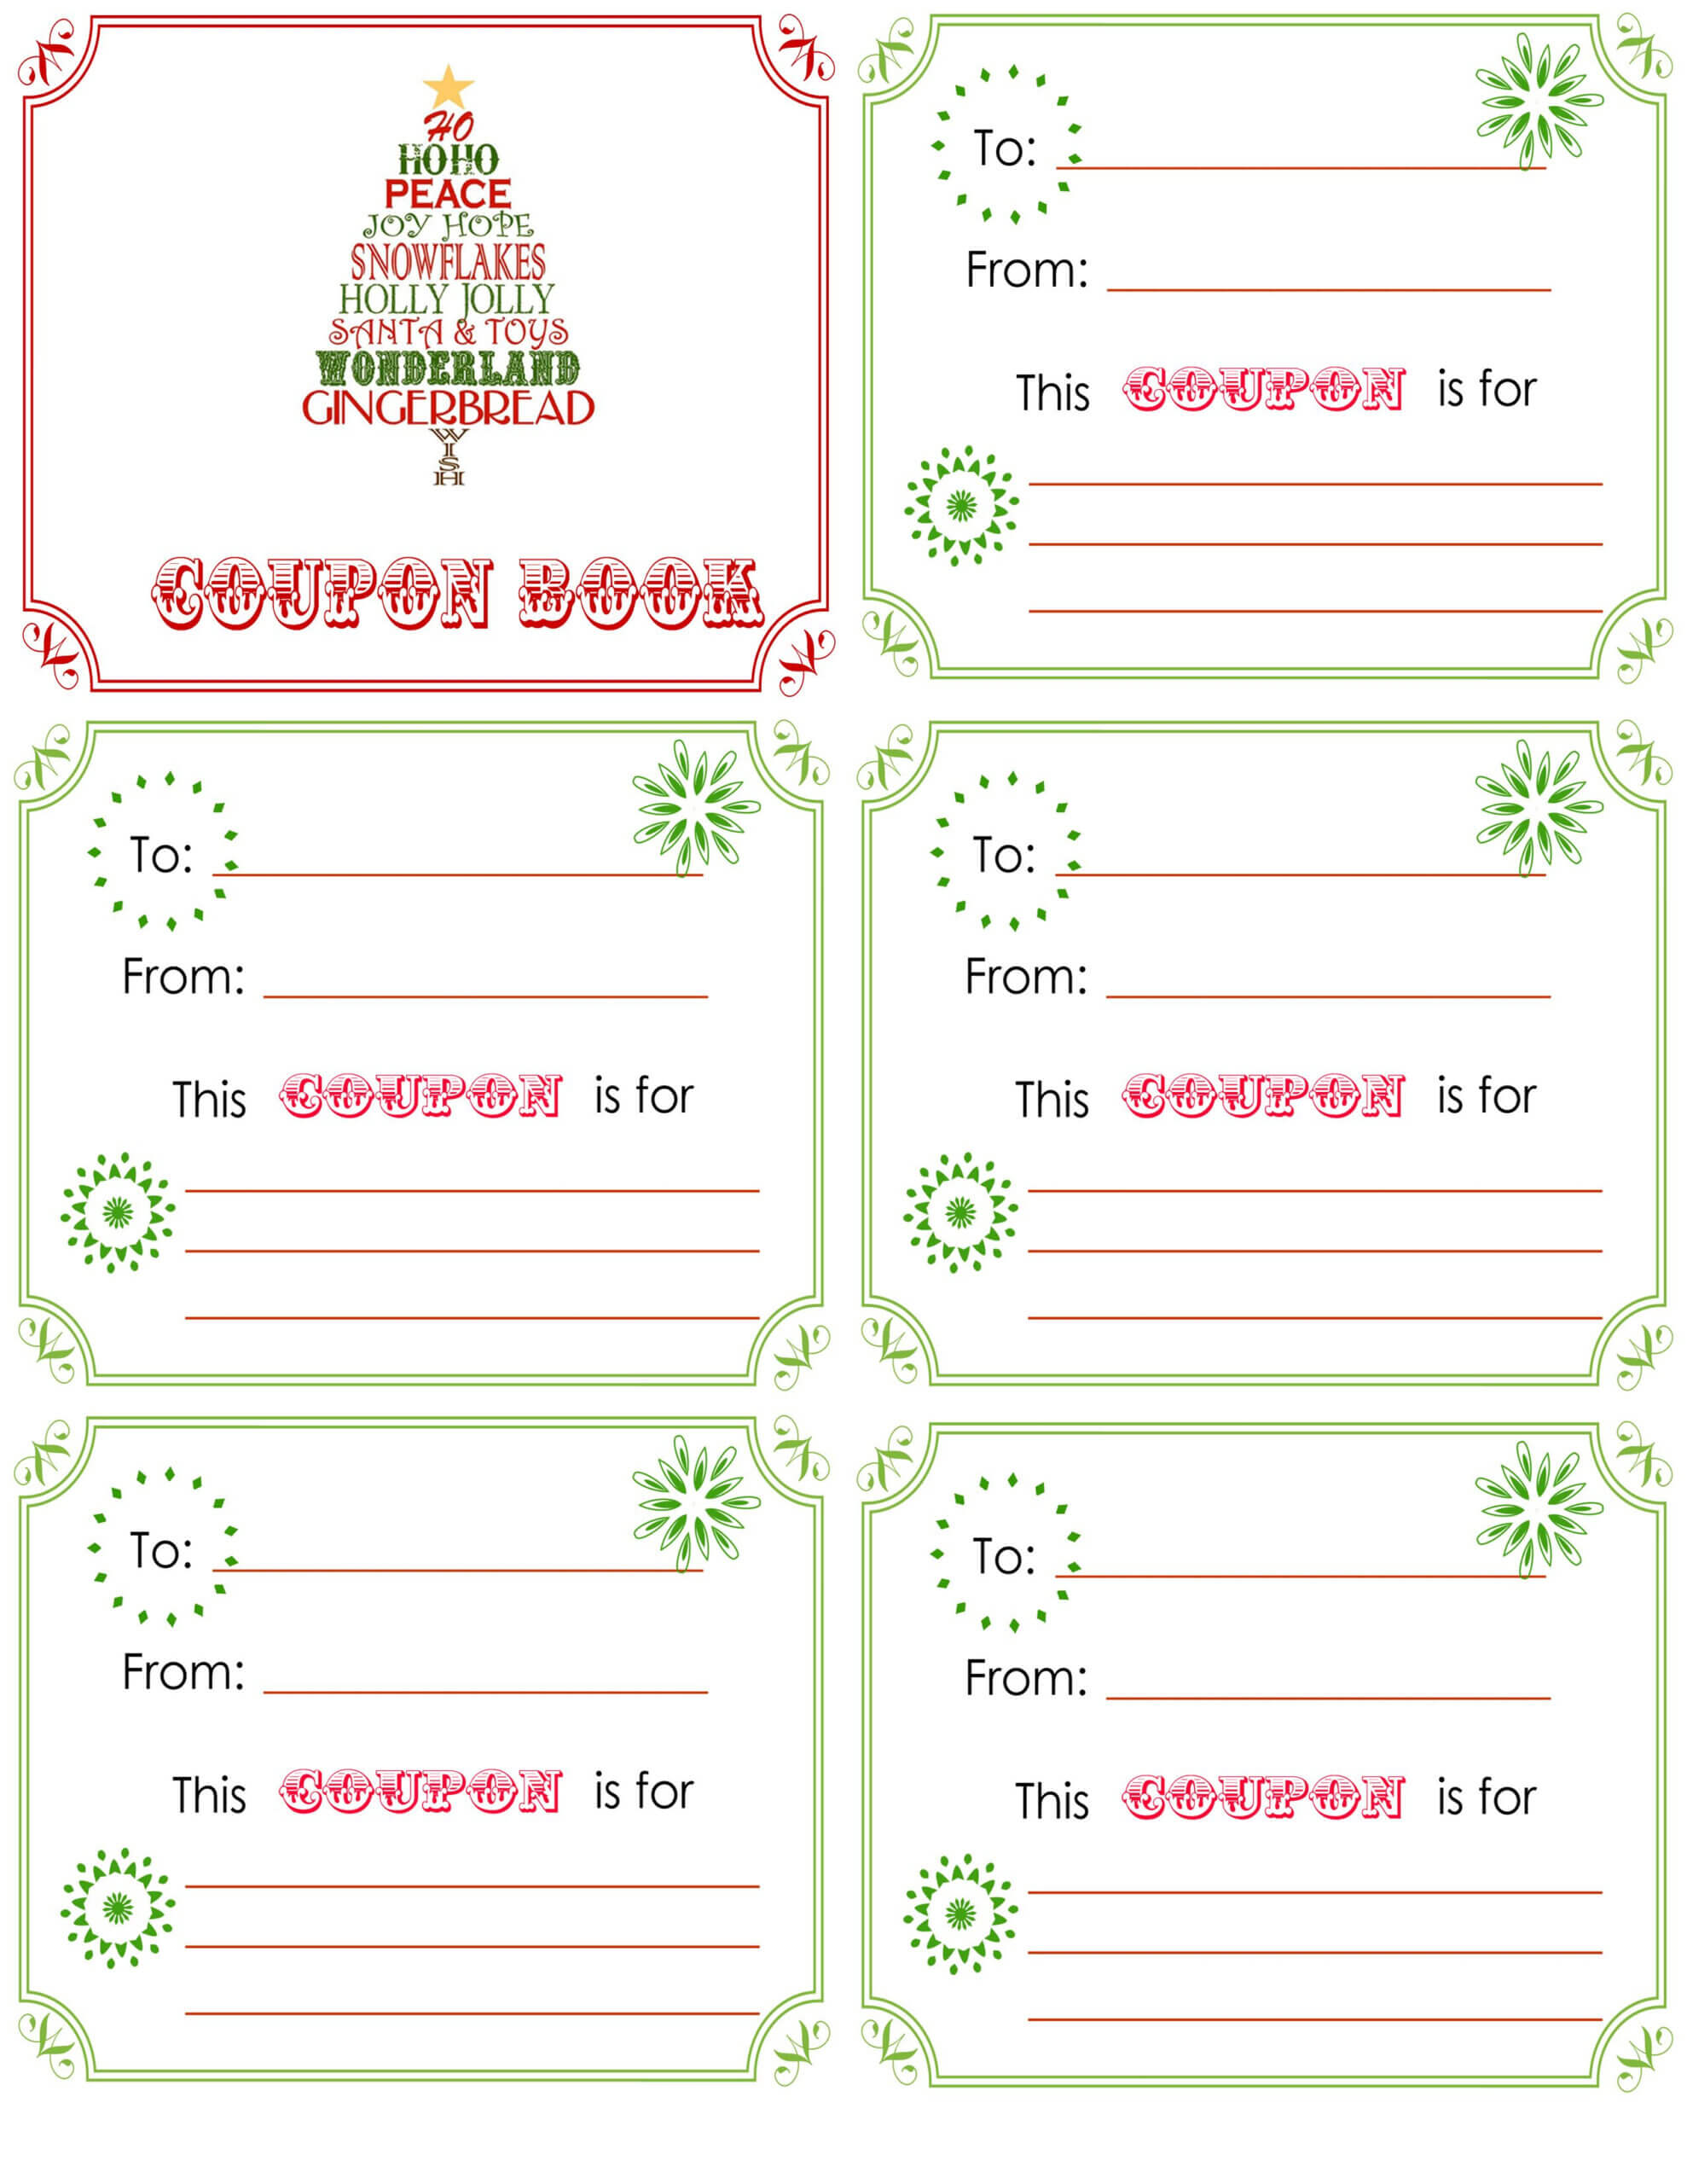 Printable Christmas Coupon Book. L Is Getting 15 Minute For Coupon Book Template Word